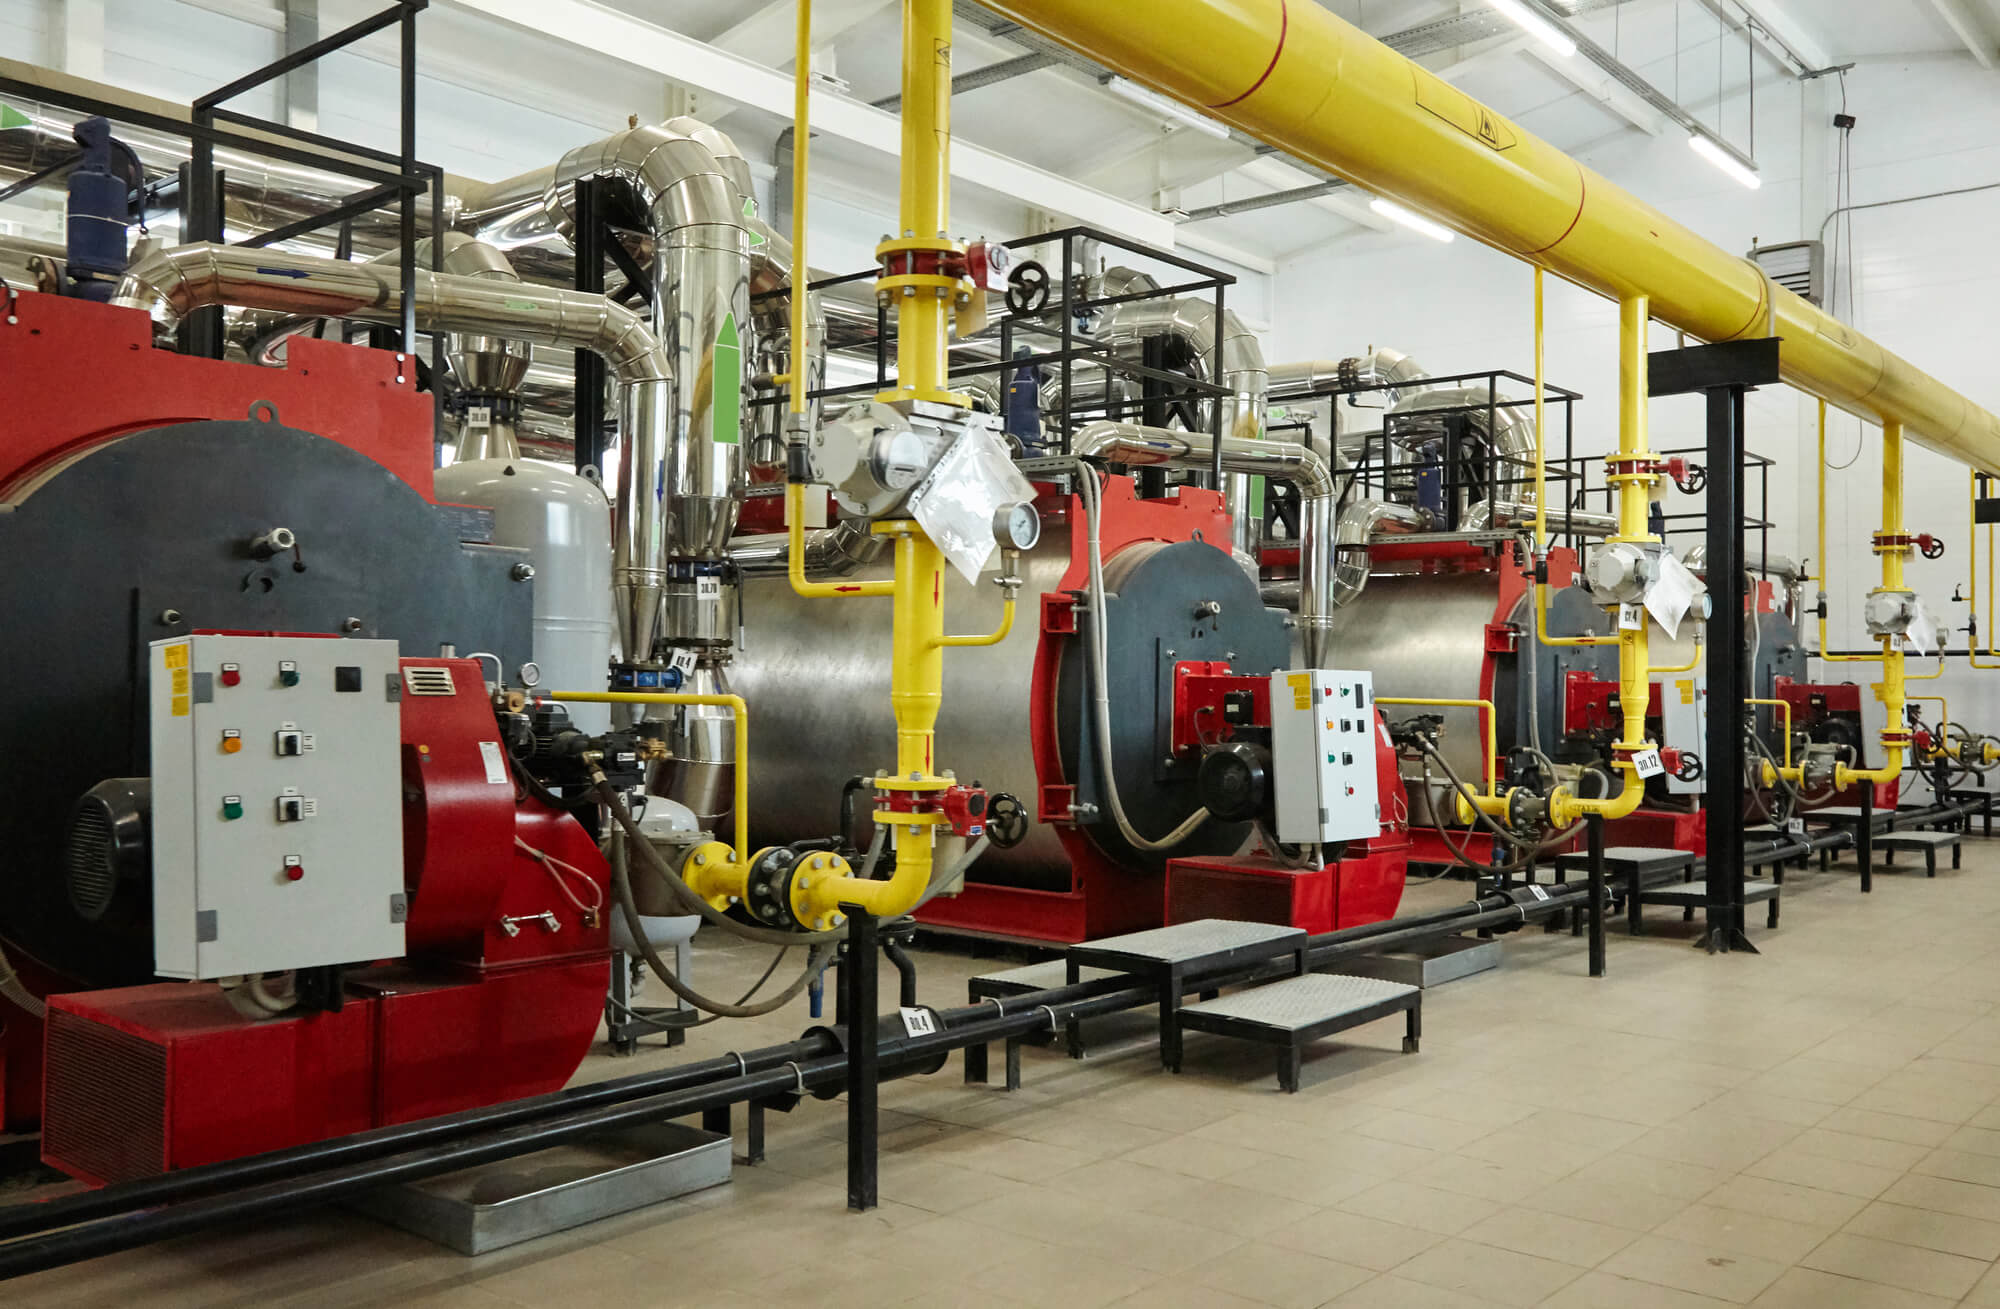 Electric, Gas Or Diesel - What Is Best For Commercial Heating? / Fanmaster